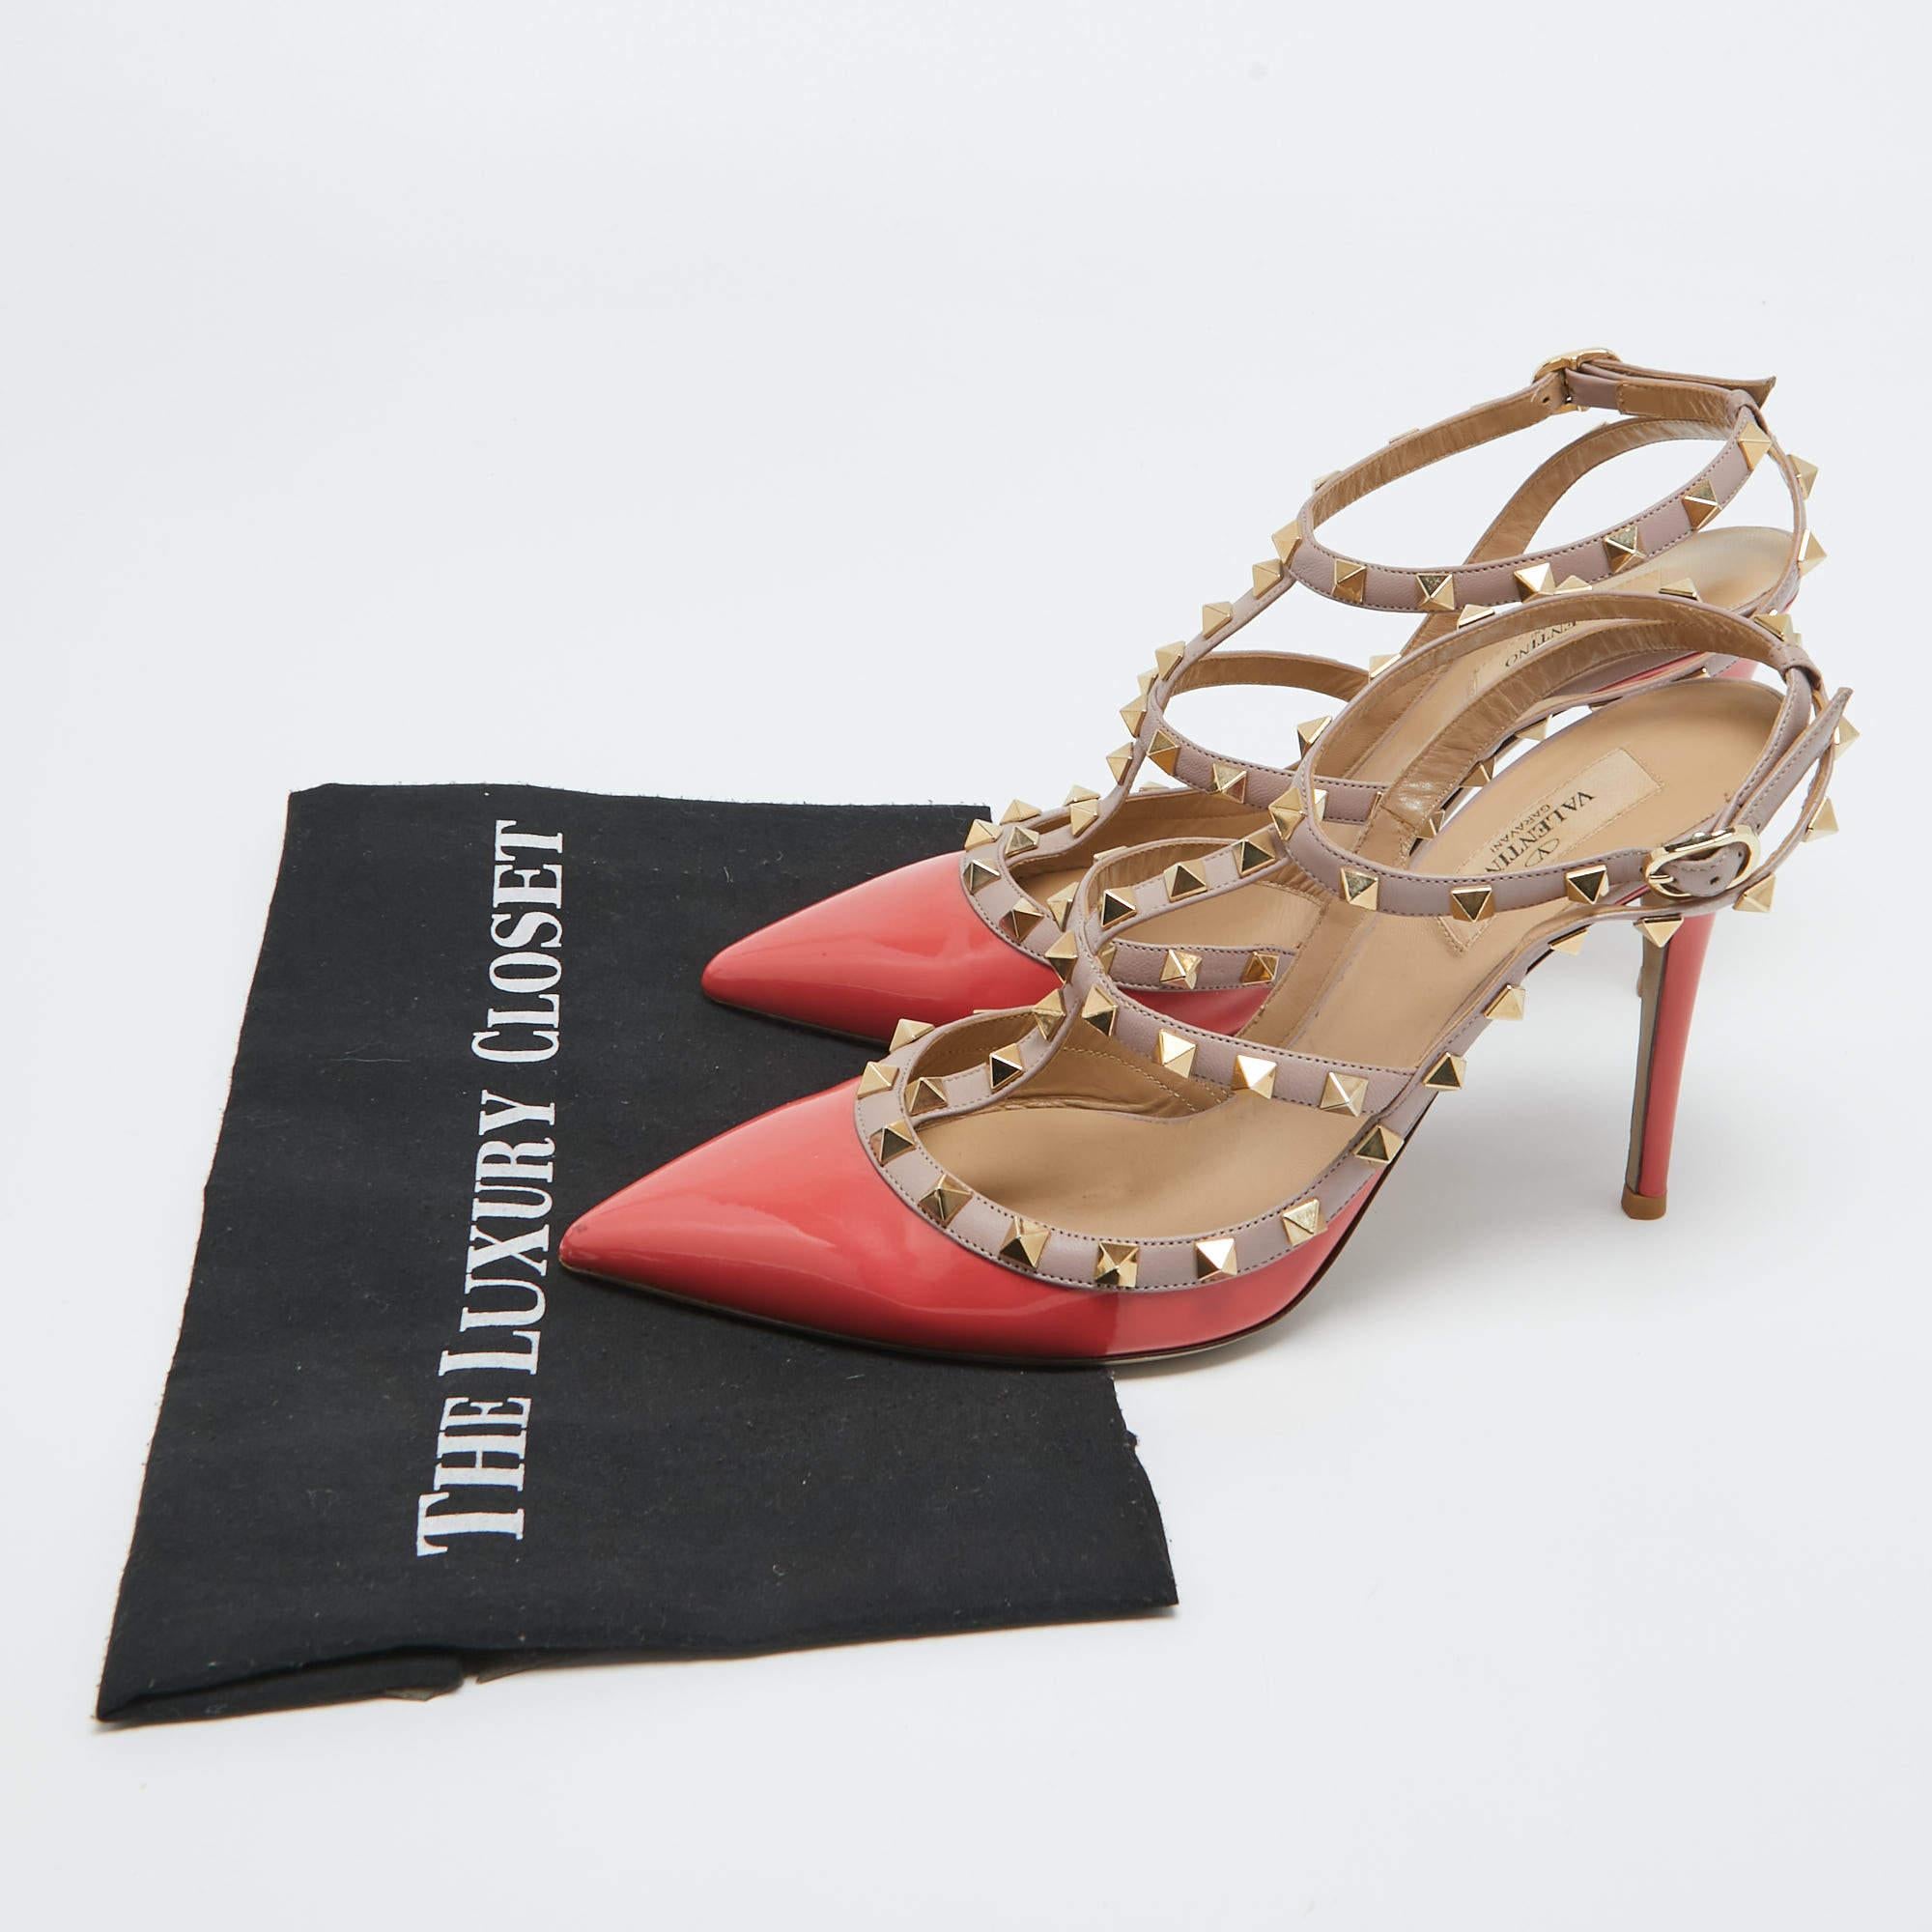 Valentino Orange/Beige Patent and Leather Rockstud Pumps Size 40 For Sale 5